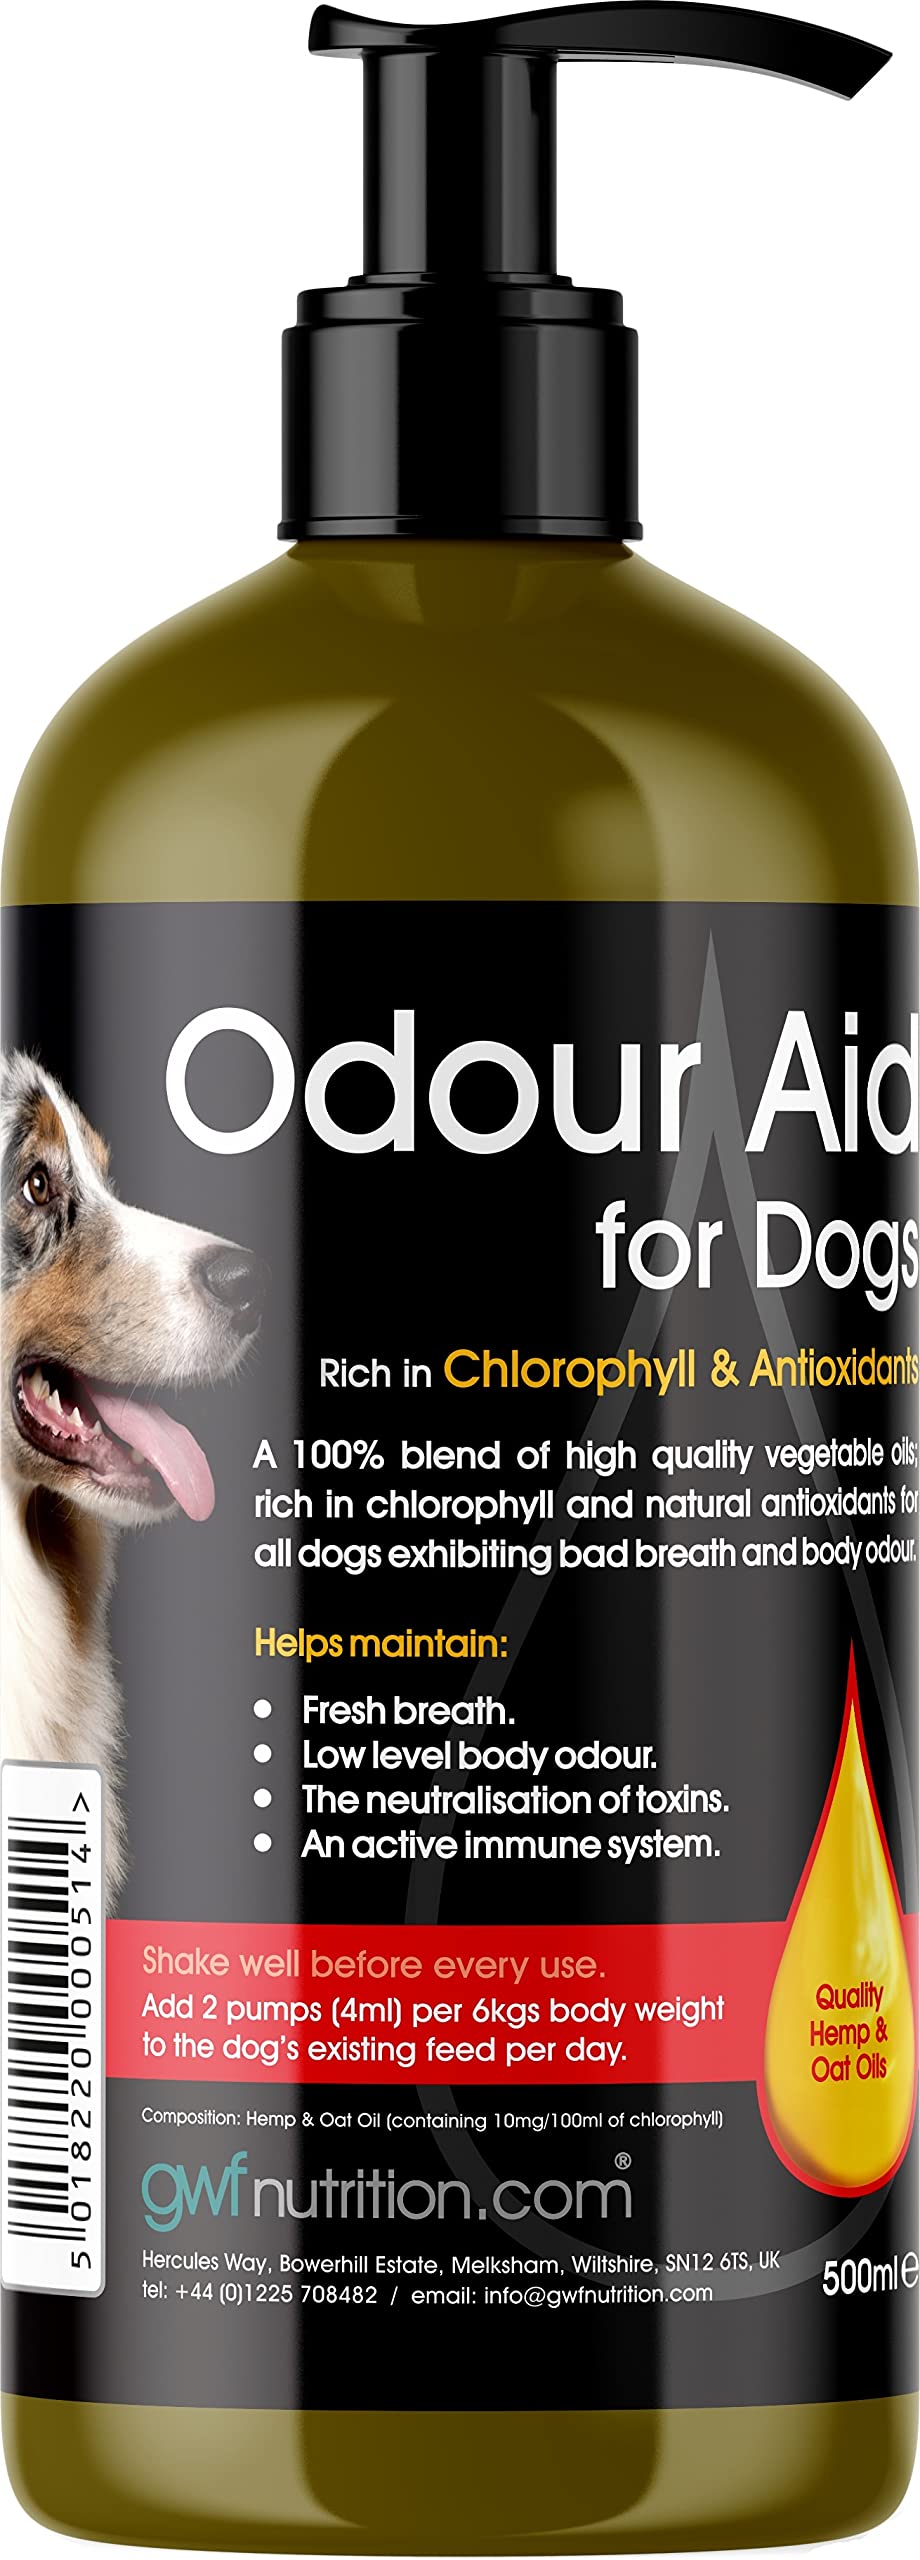 GWF Nutrition Odour Aid For Dogs Bottle 500 ml - PawsPlanet Australia